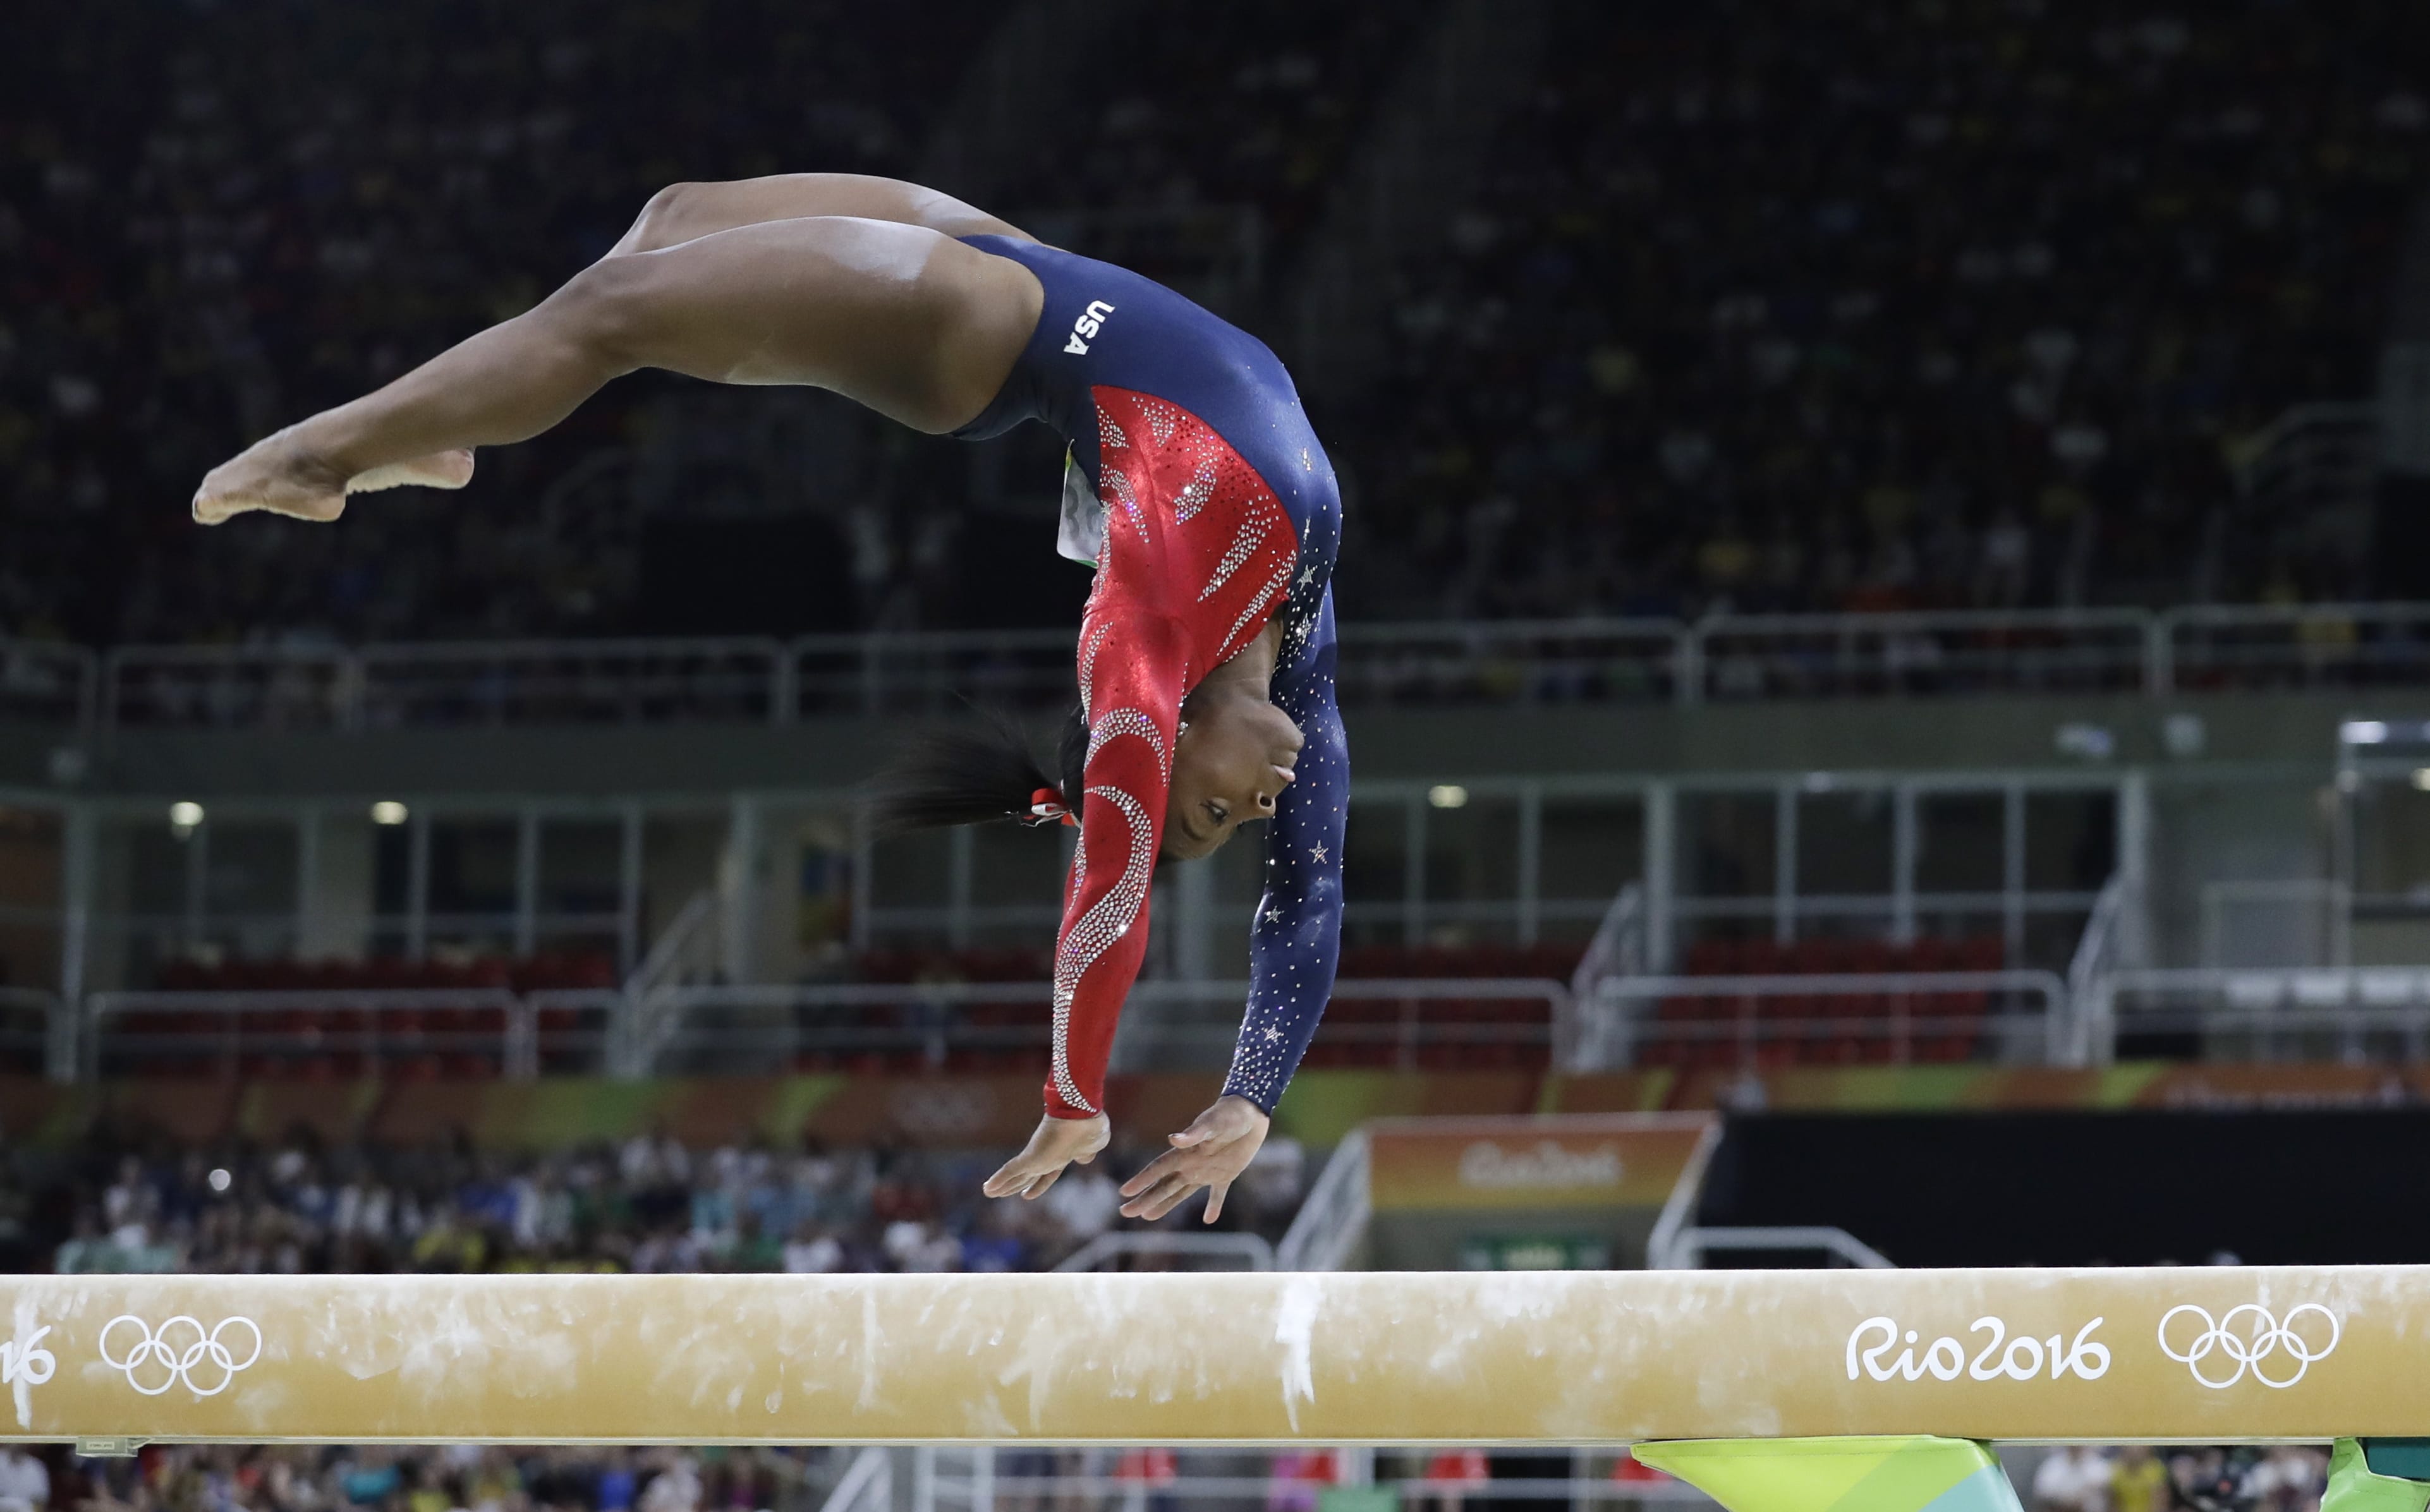 United States' Simone Biles performs on the balance beam during the artistic gymnastics women's qualification at the 2016 Summer Olympics in Rio de Janeiro, Brazil, Sunday, Aug. 7, 2016.